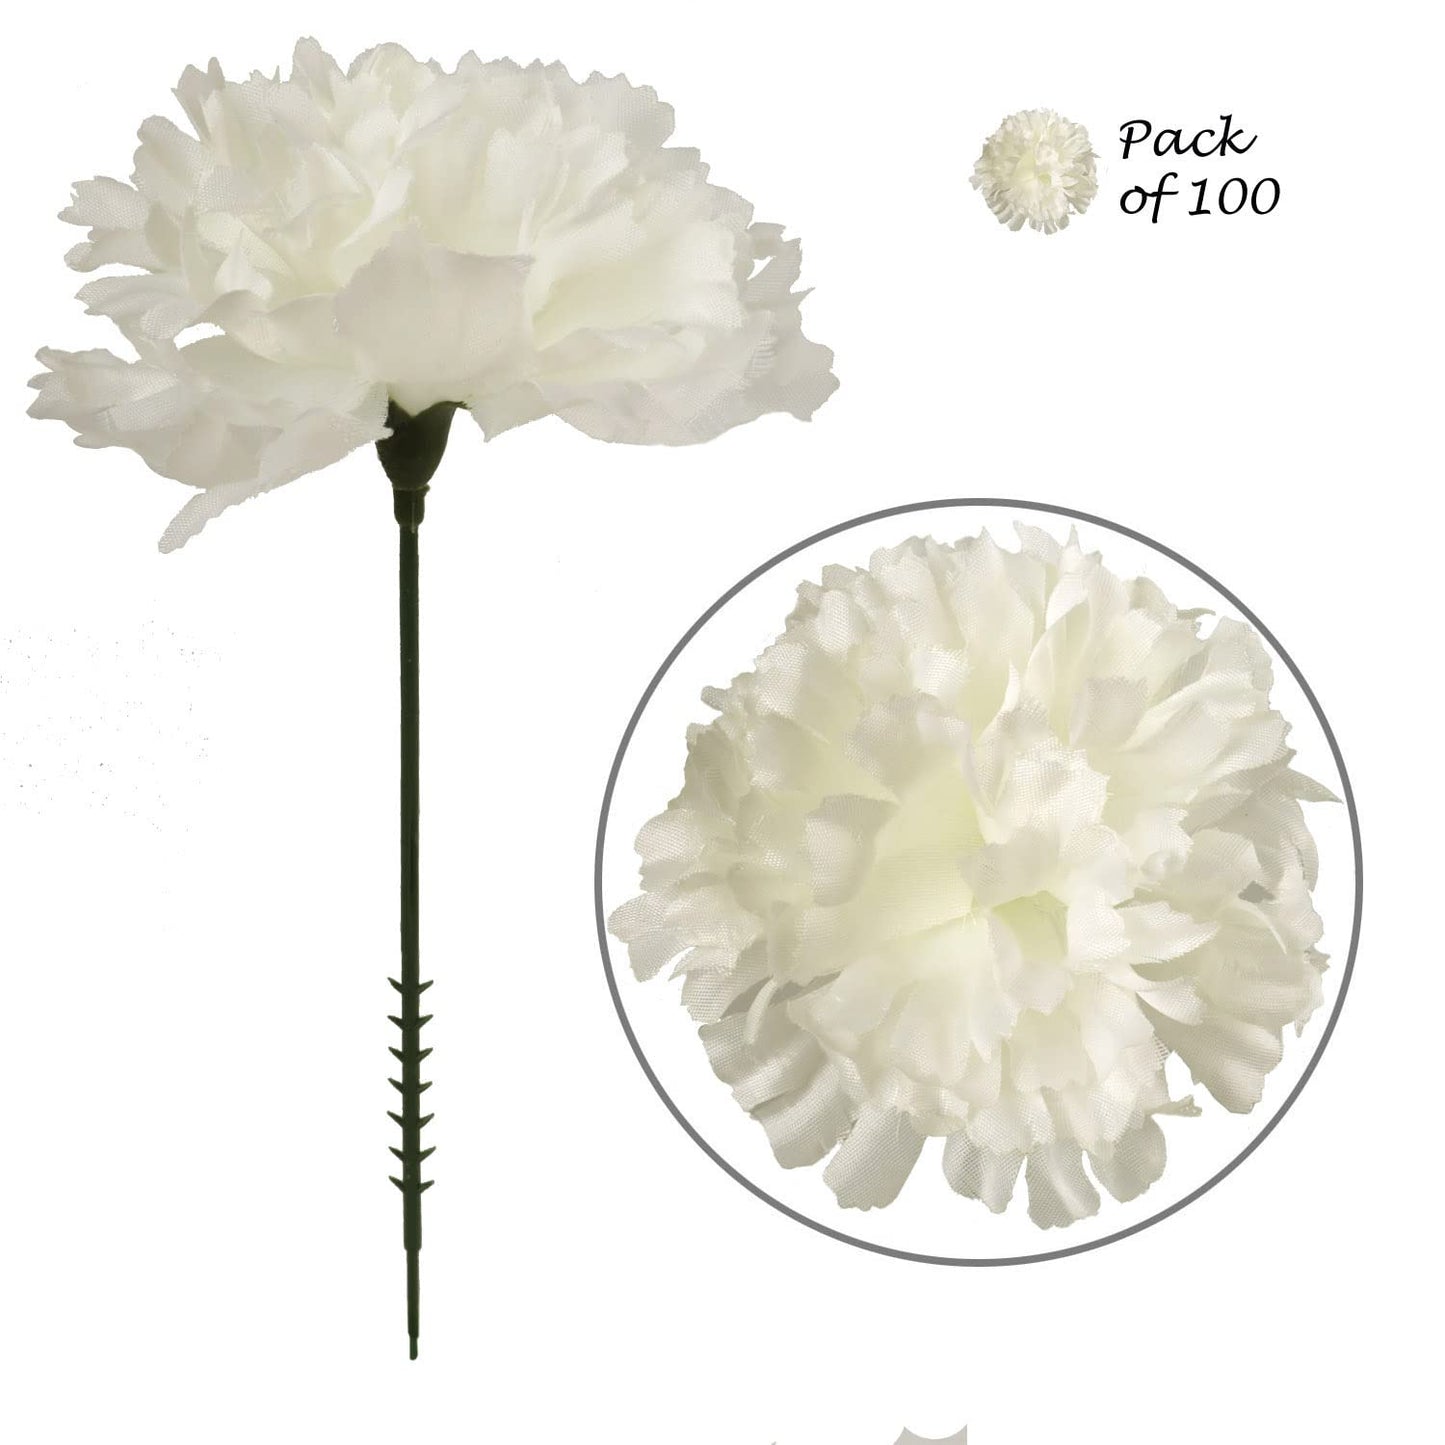 Lifelike 3.5"Diam Carnations - Perfect for DIY Weddings, Centerpieces, Parties; Elevate Your Space with Stunning Silk Flowers